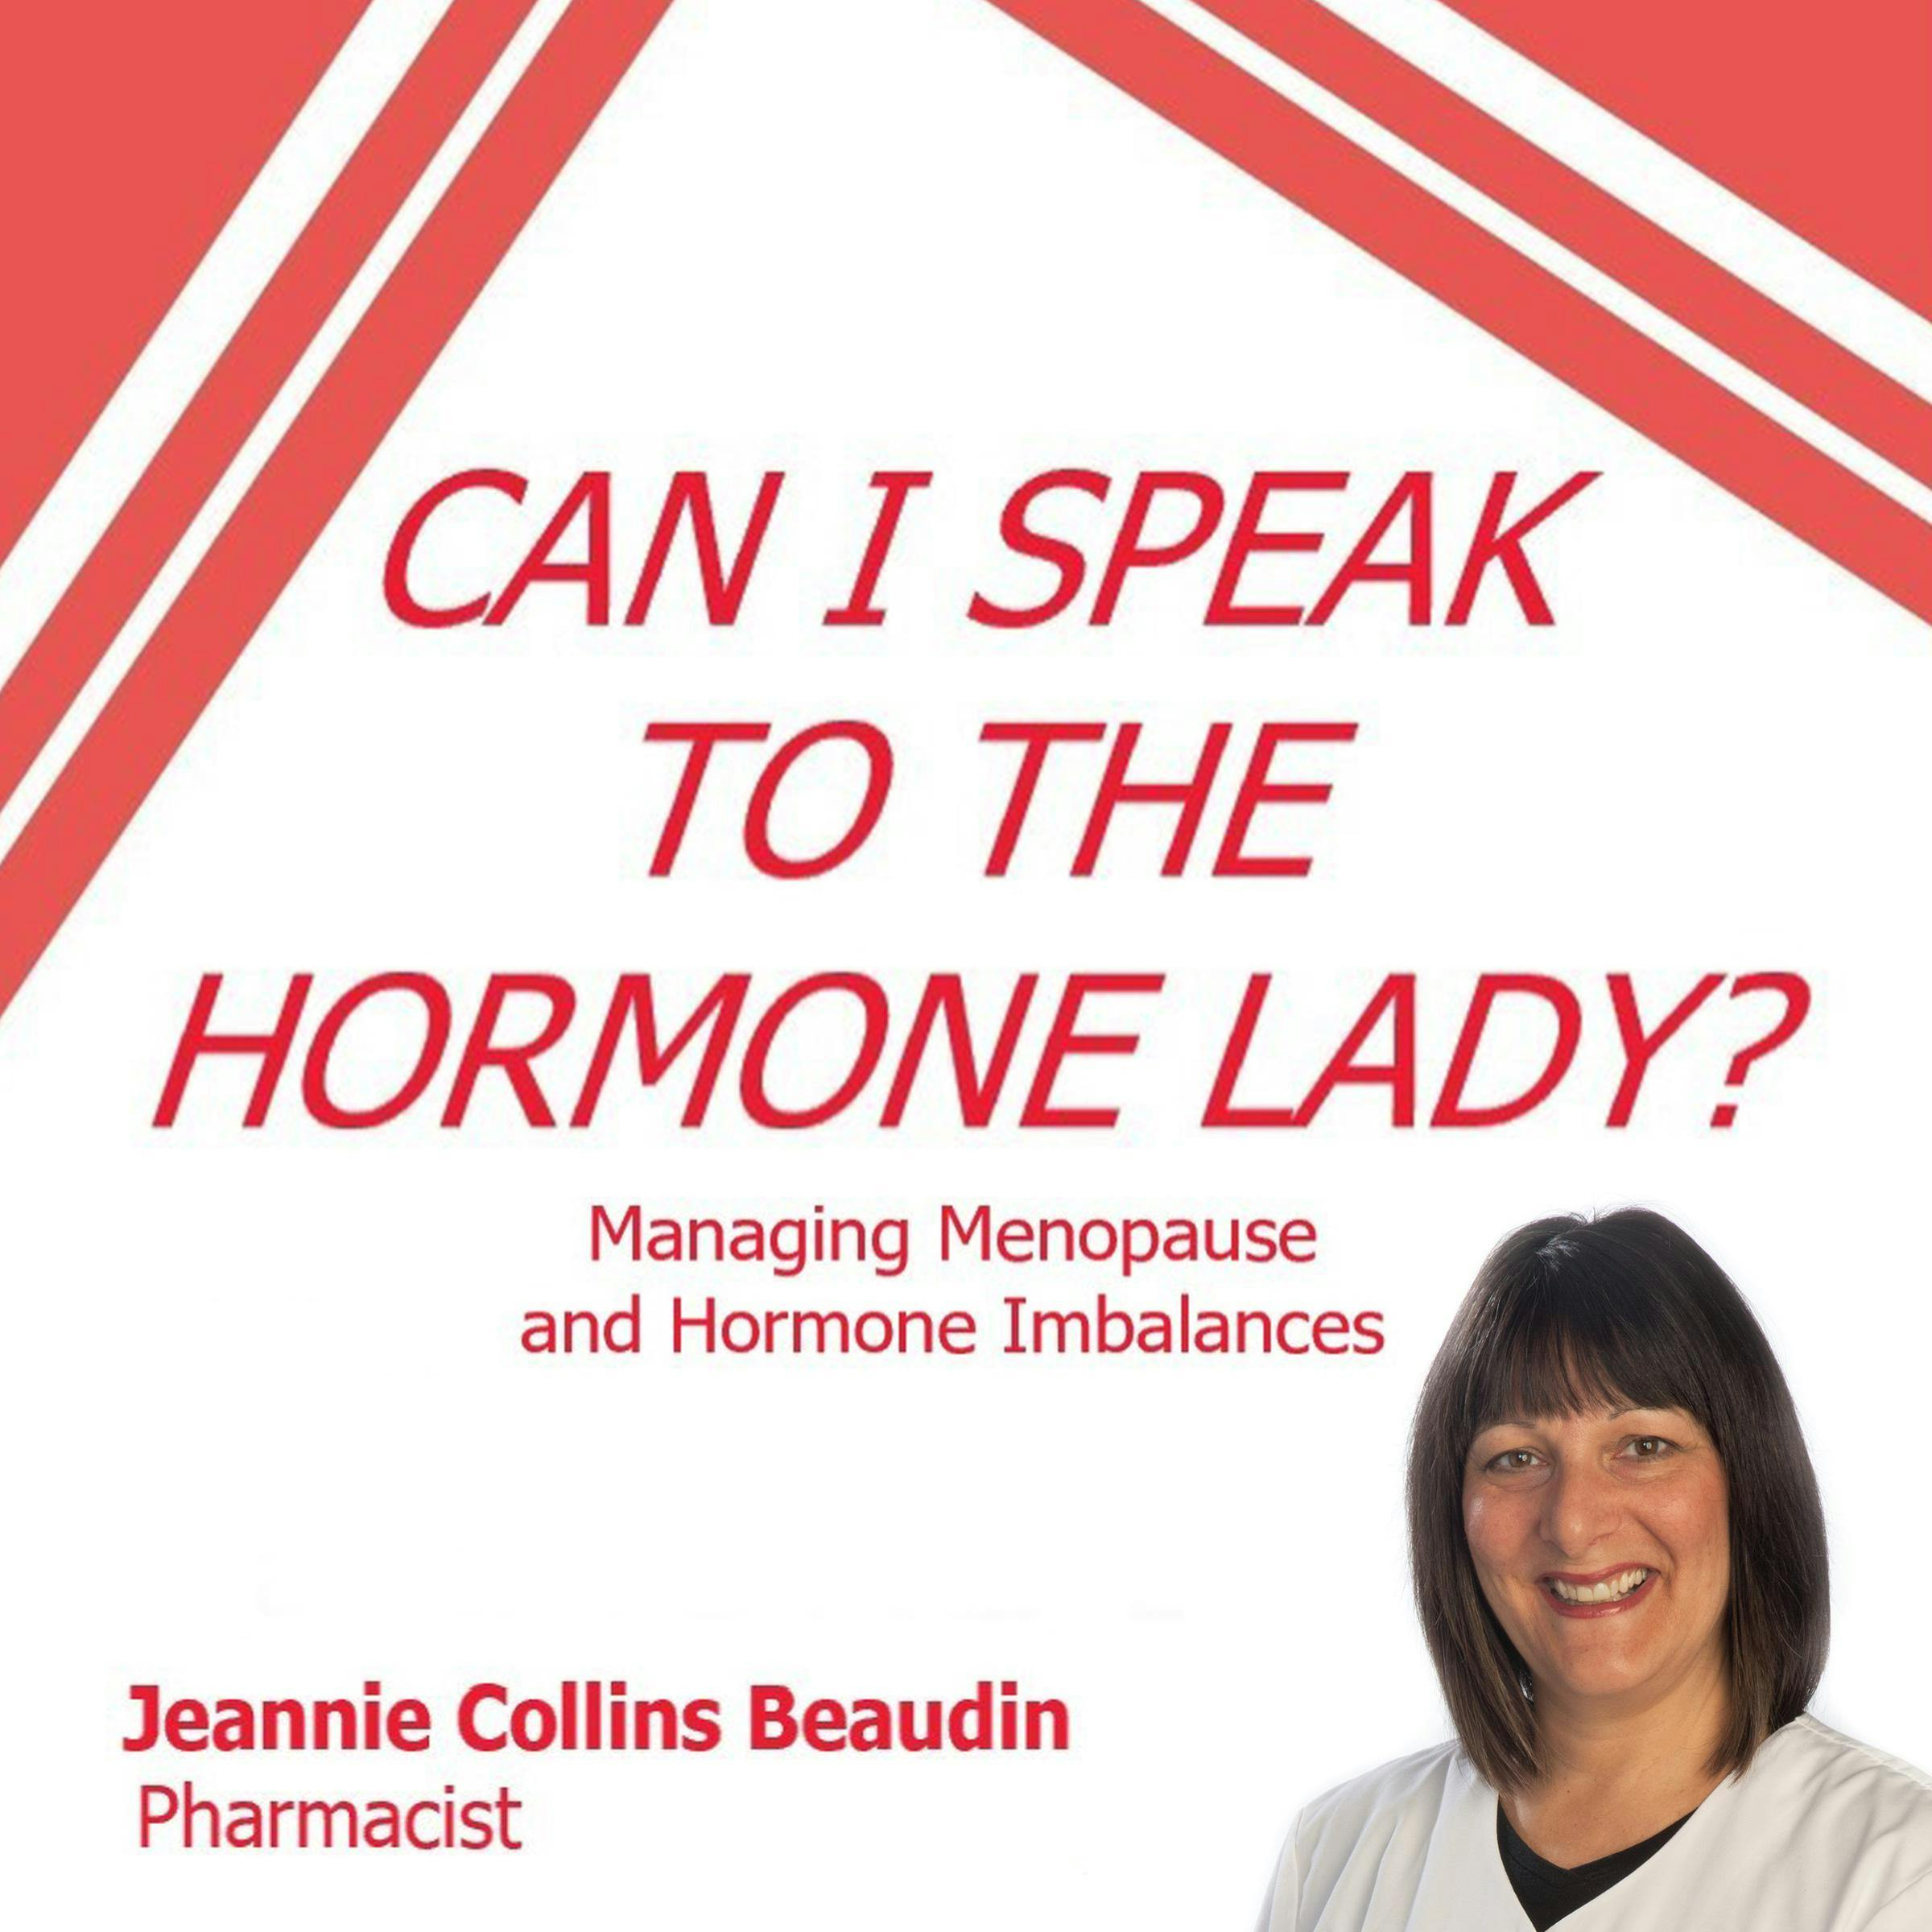 Can I Speak to the Hormone Lady?: Managing Menopause and Hormone Imbalances - Jeannie Collins Beaudin